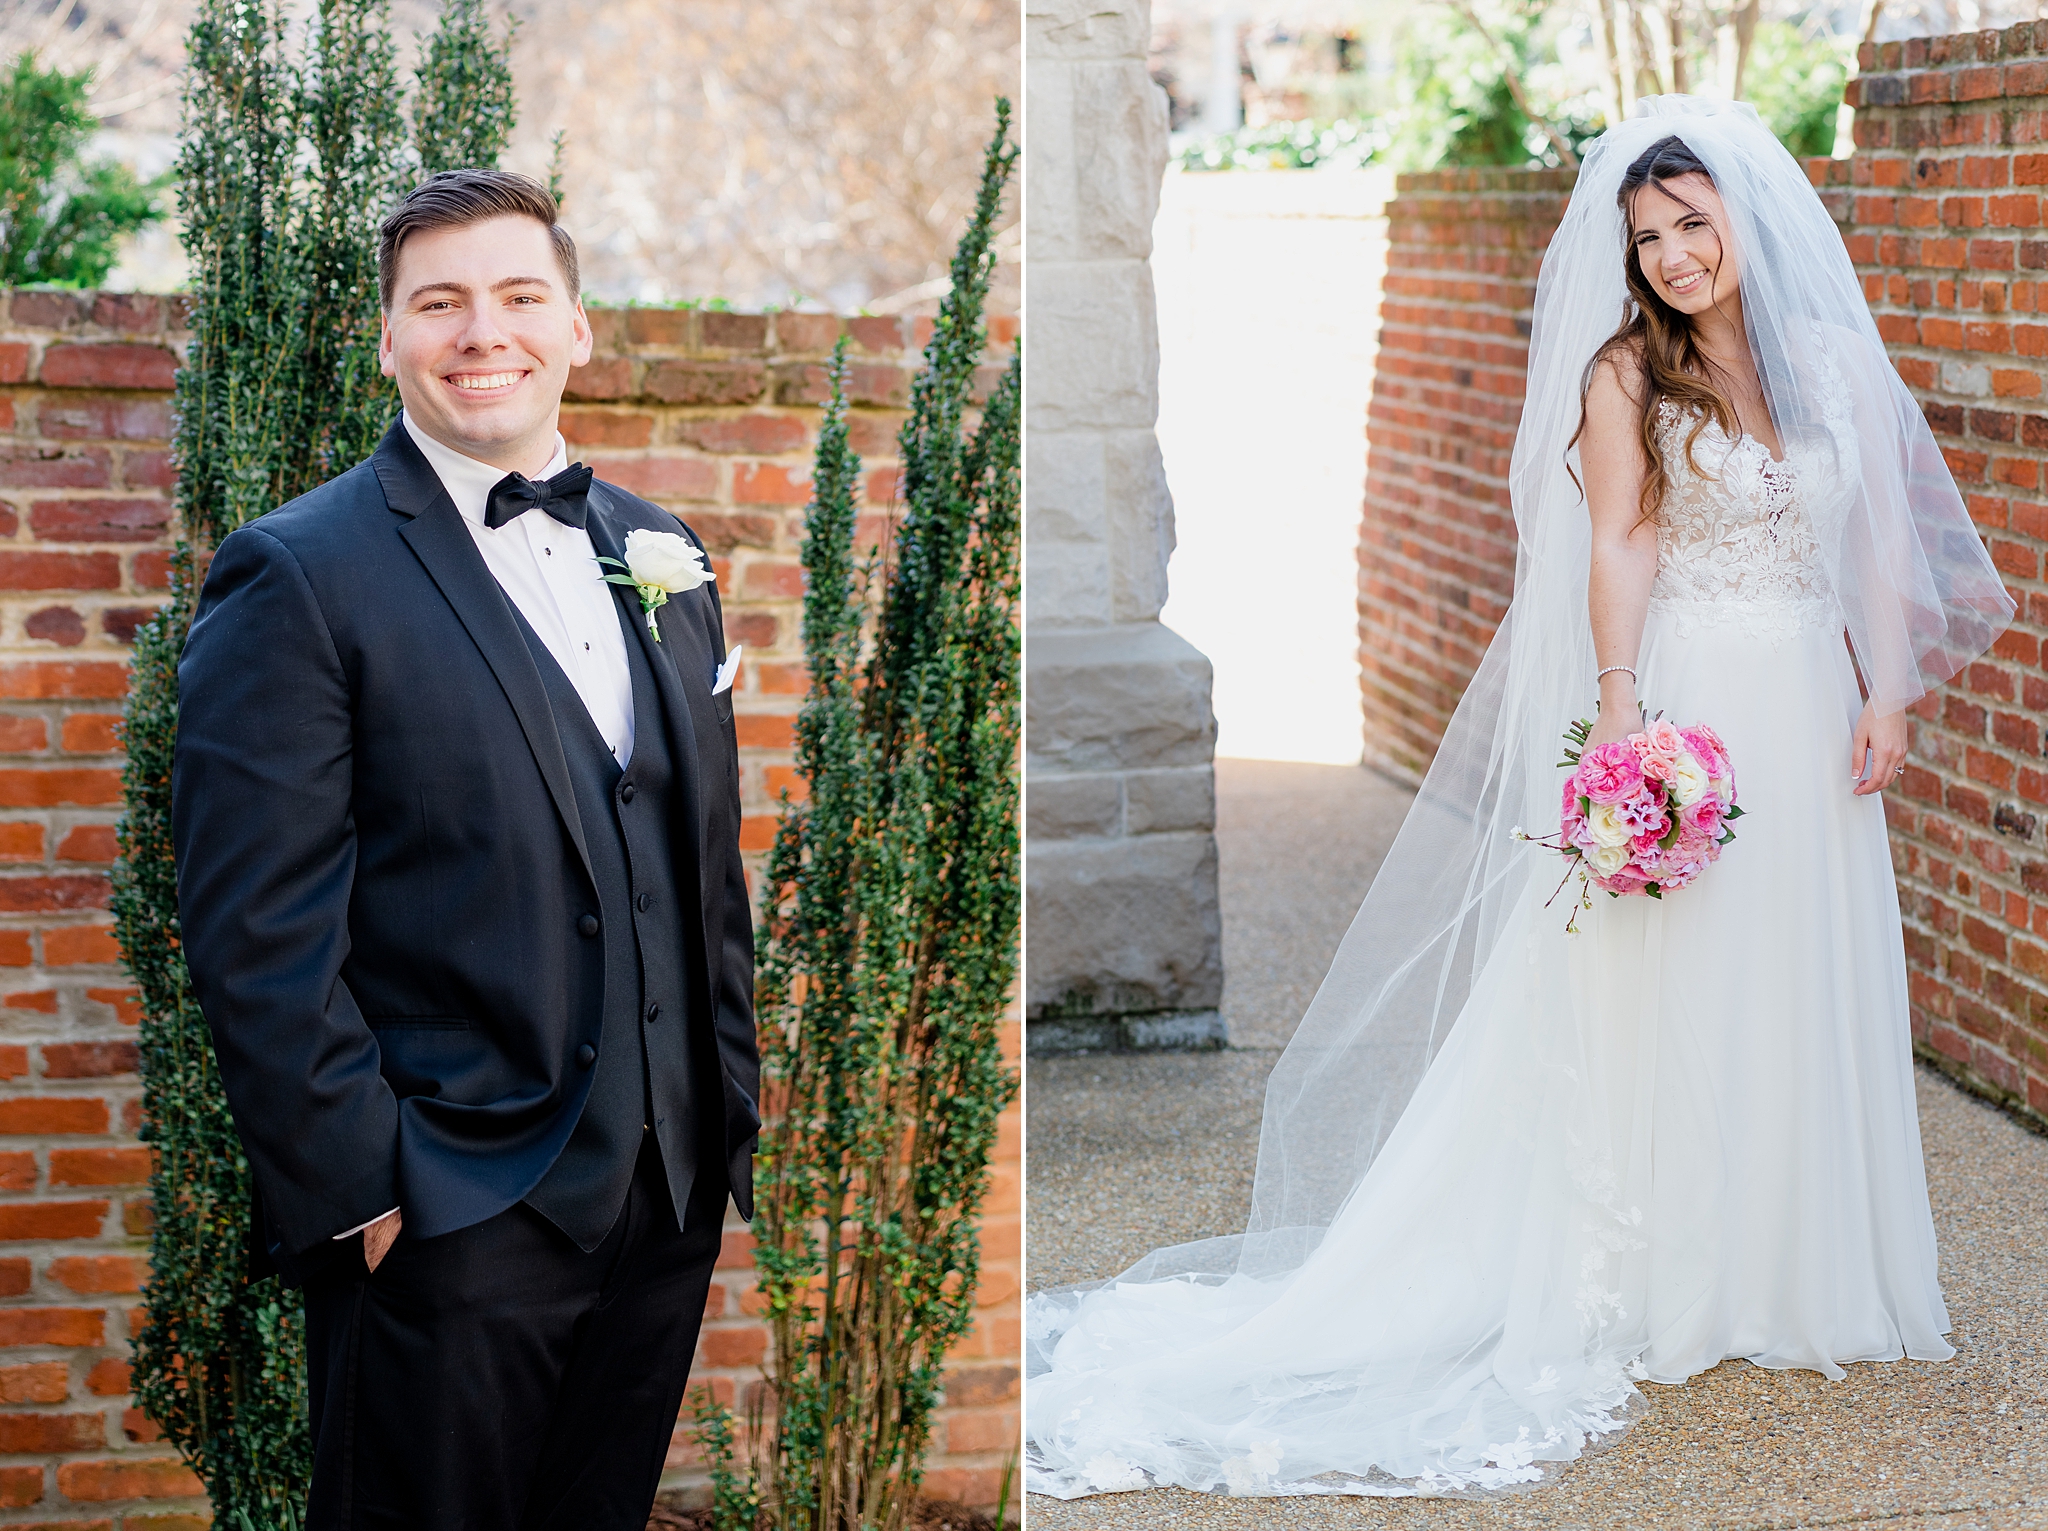 Bride and groom portraits for their wedding at The Alexandrian Hotel in Old Town Alexandria.